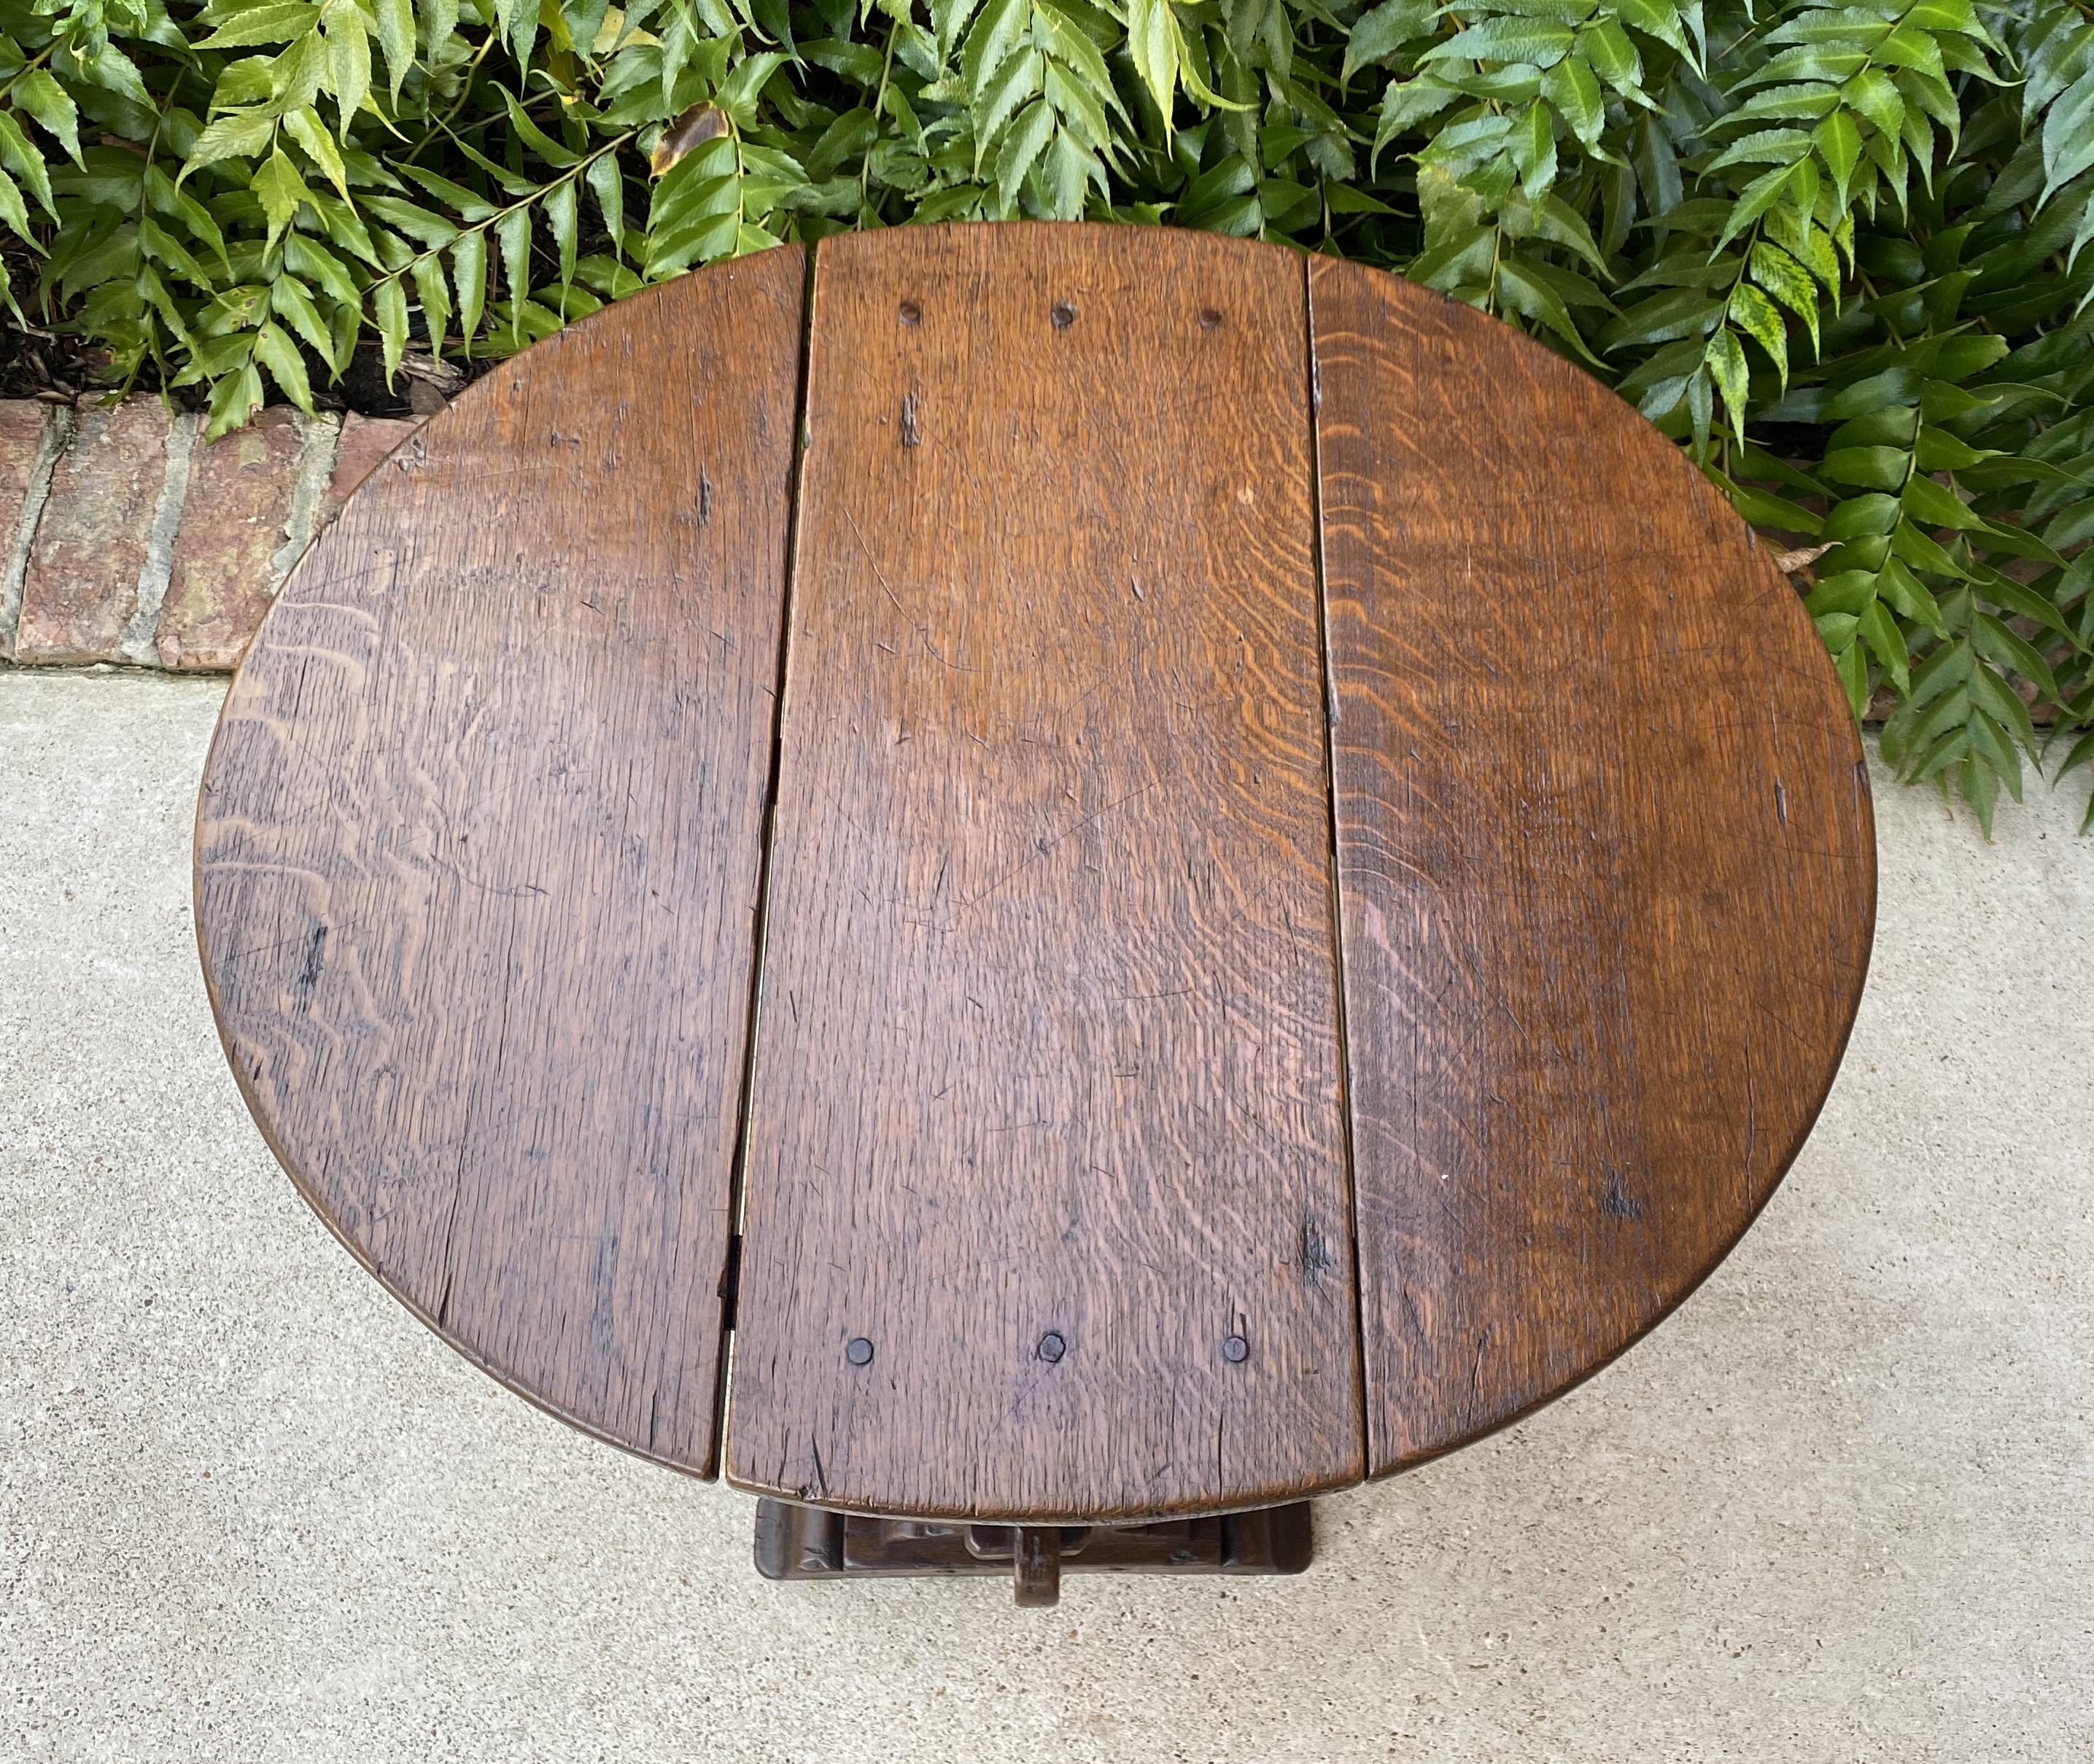 Early 20th Century Antique English Table Drop Leaf Trestle Base Petite Oak Pegged Oval End Table